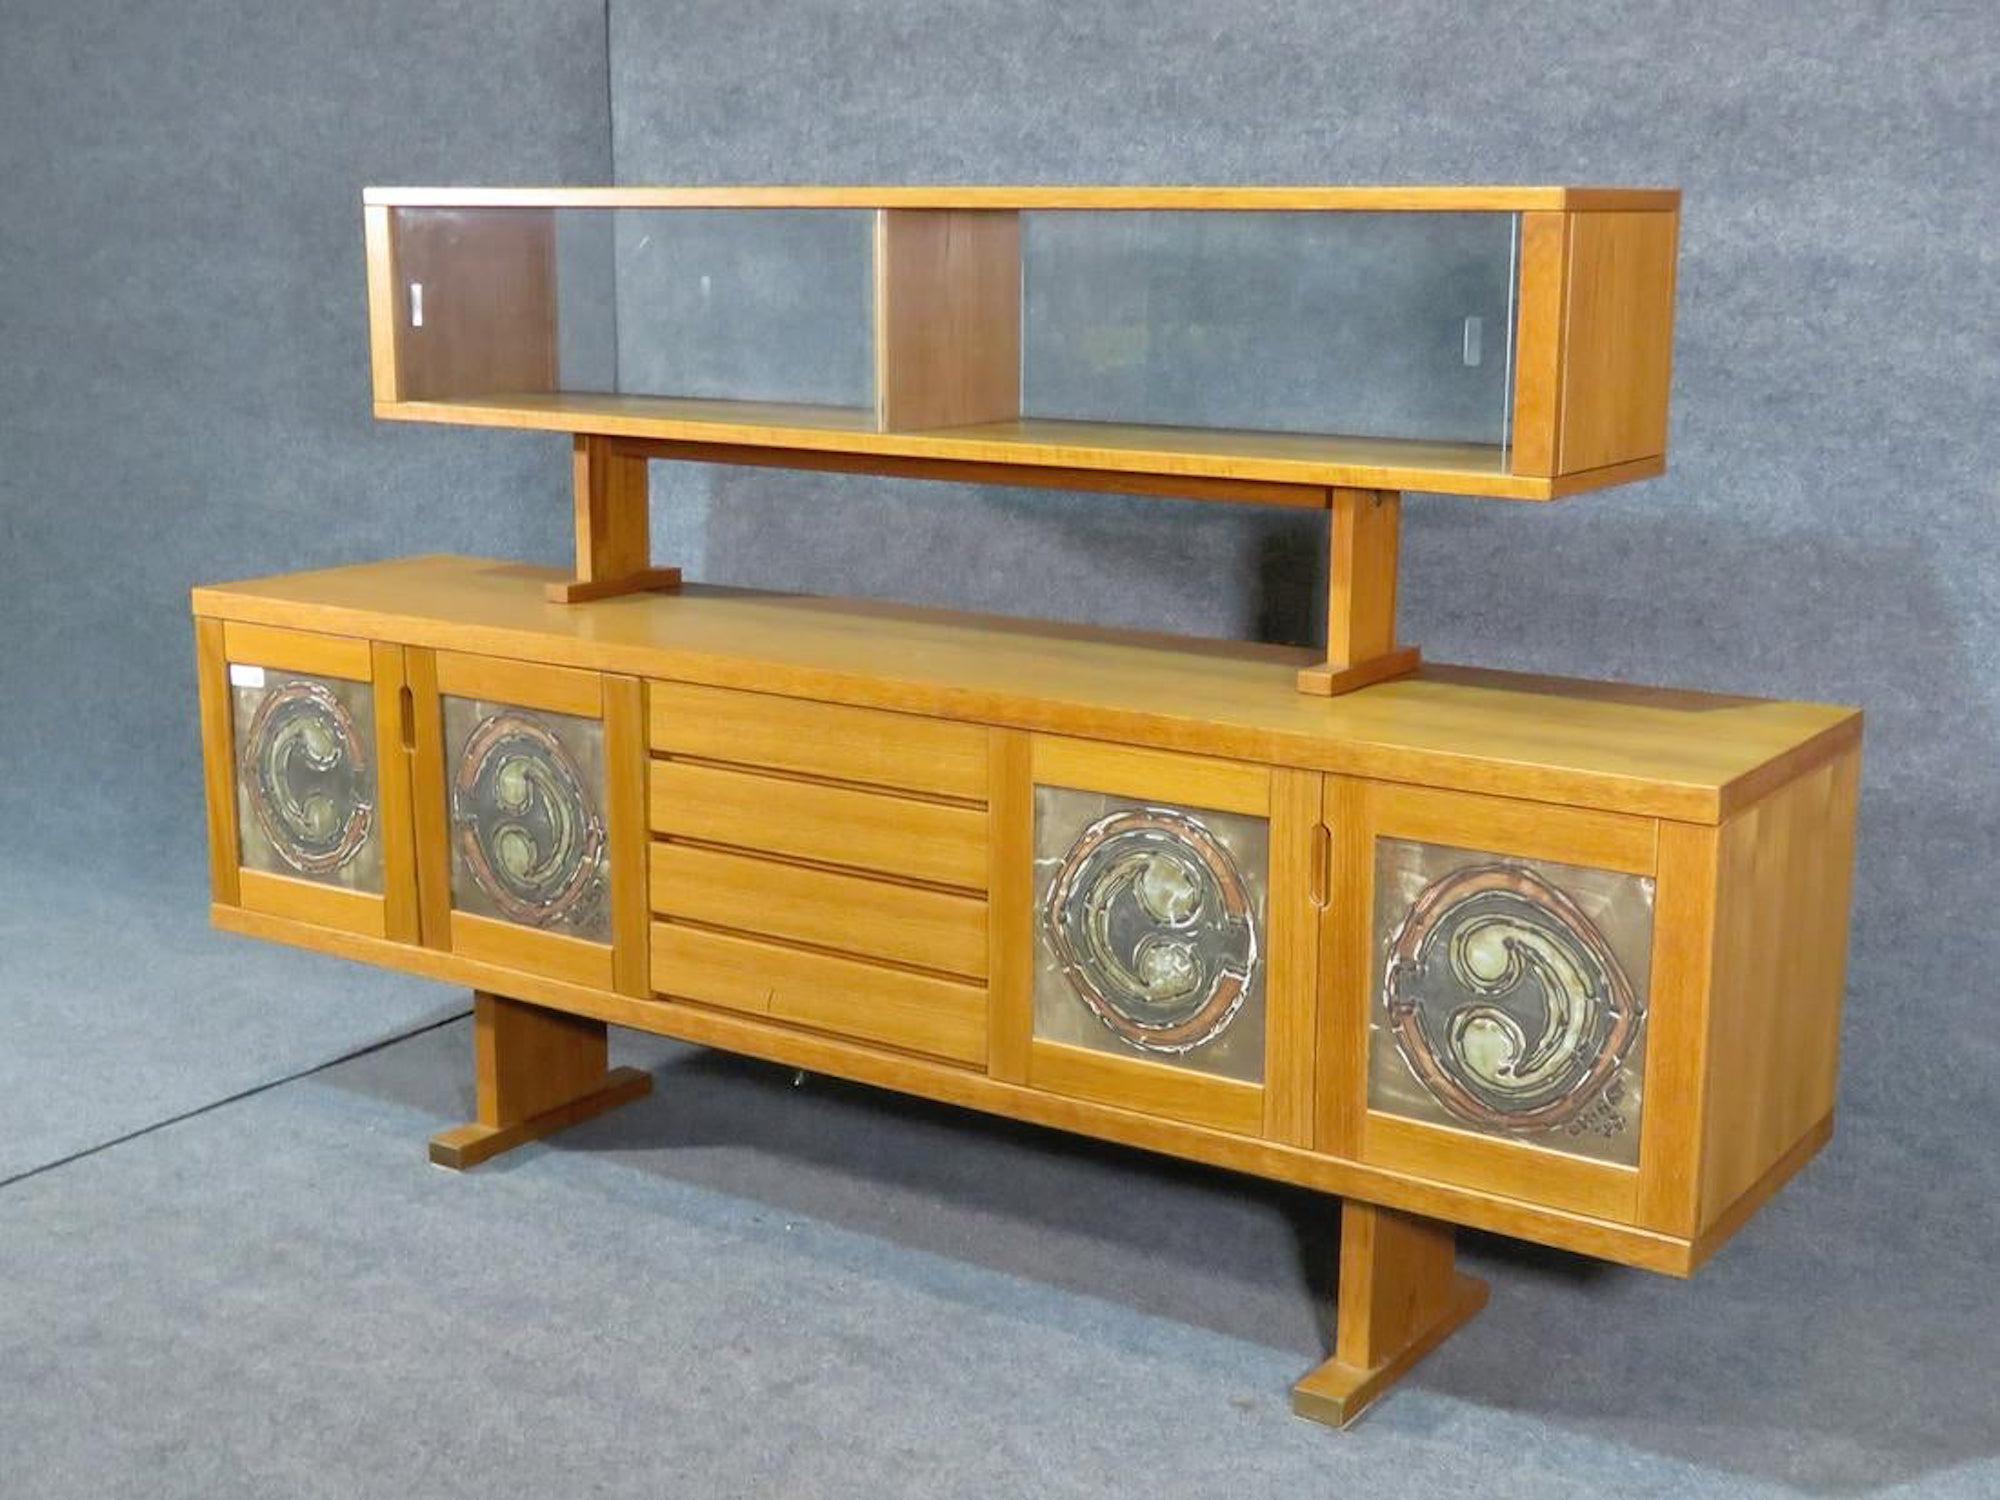 Tile front credenza with topper in teak wood grain.
(Please confirm item location - NY or NJ - with dealer).
 